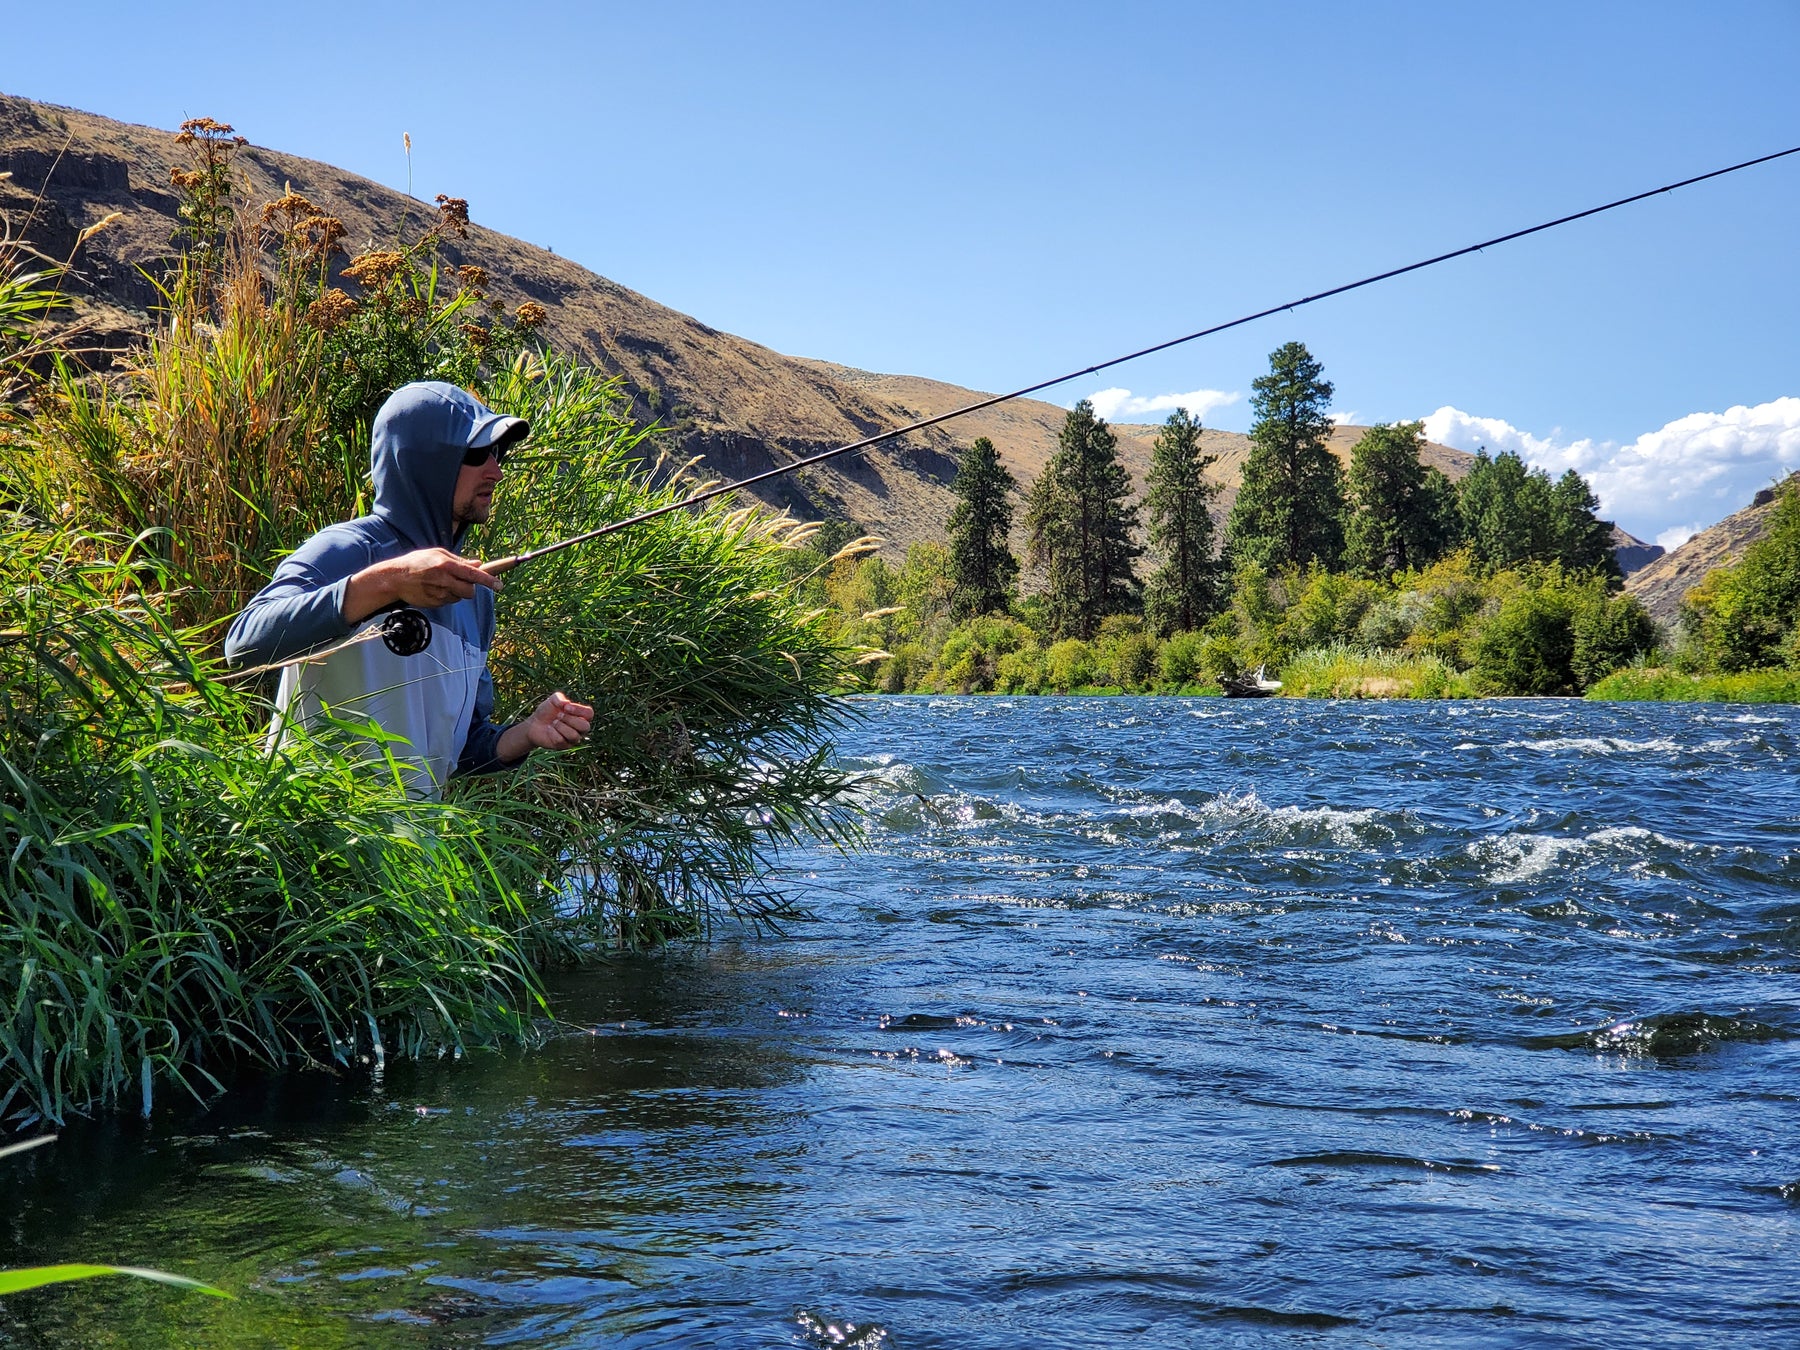 Upcoming Experiences and Fly Fishing Courses